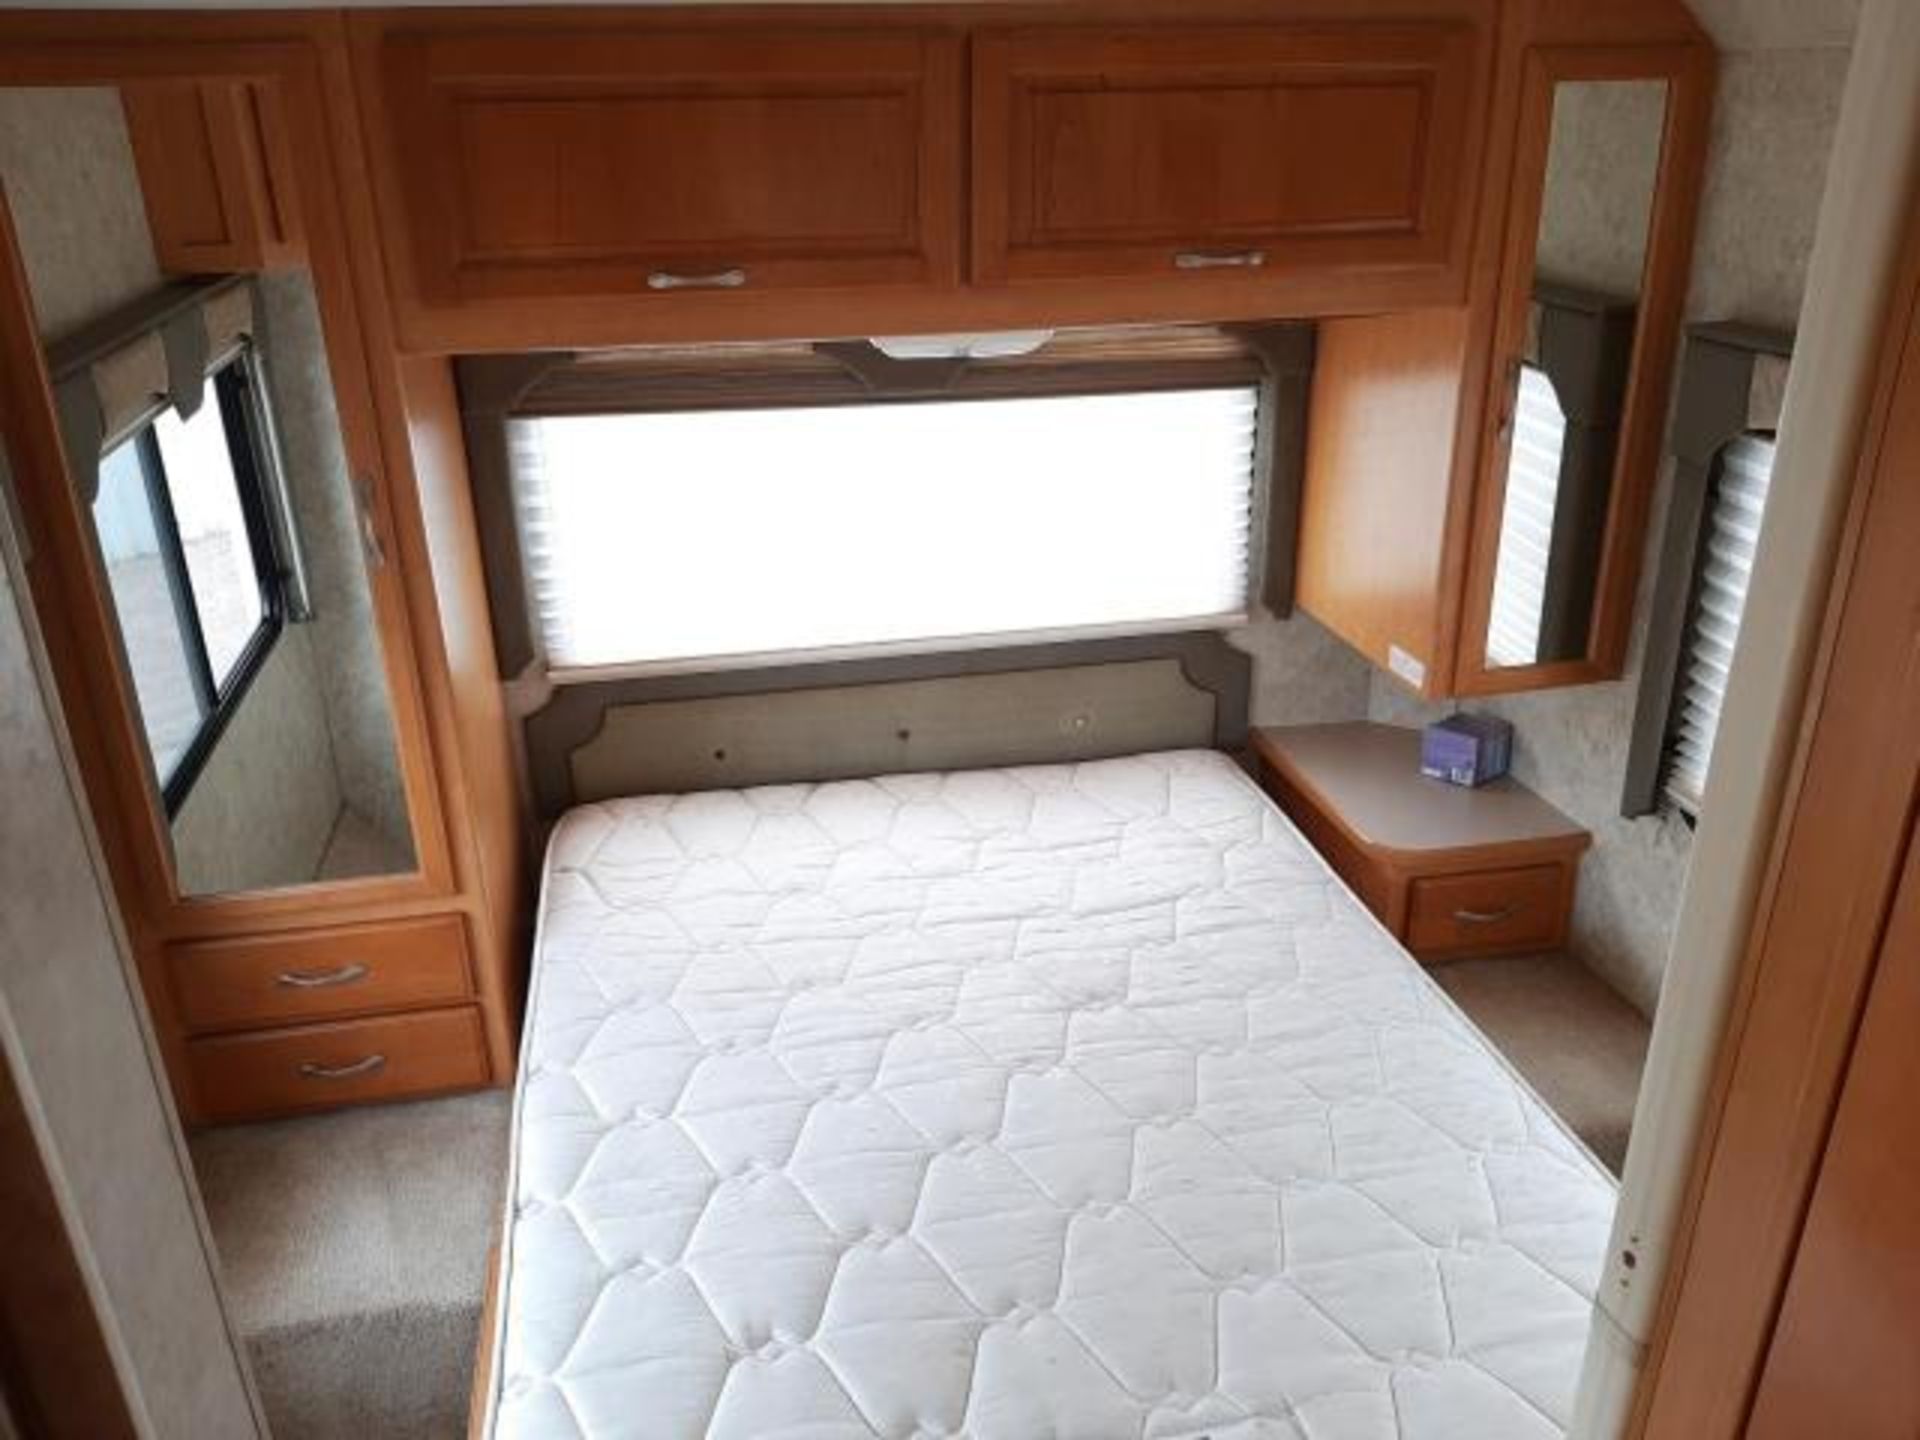 FORD E450 FOURWINDS RV 7 BERTH LHD MOTORHOME, VERY LOW MILEAGE 34,453 MILES *NO VAT* - Image 10 of 13